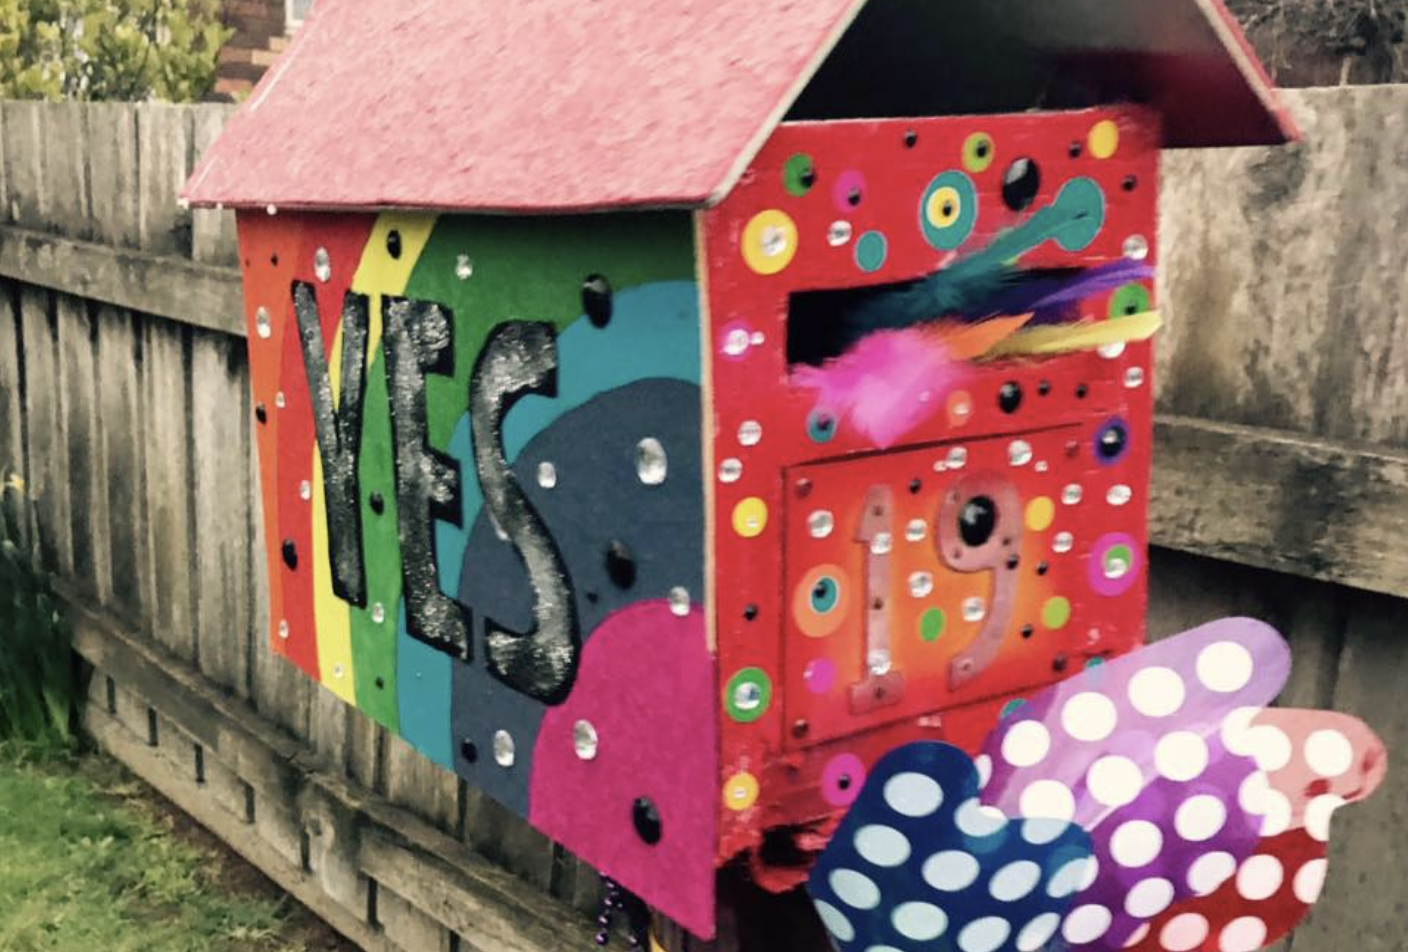 Aussies are giving their mailboxes a drag makeover for marriage equality